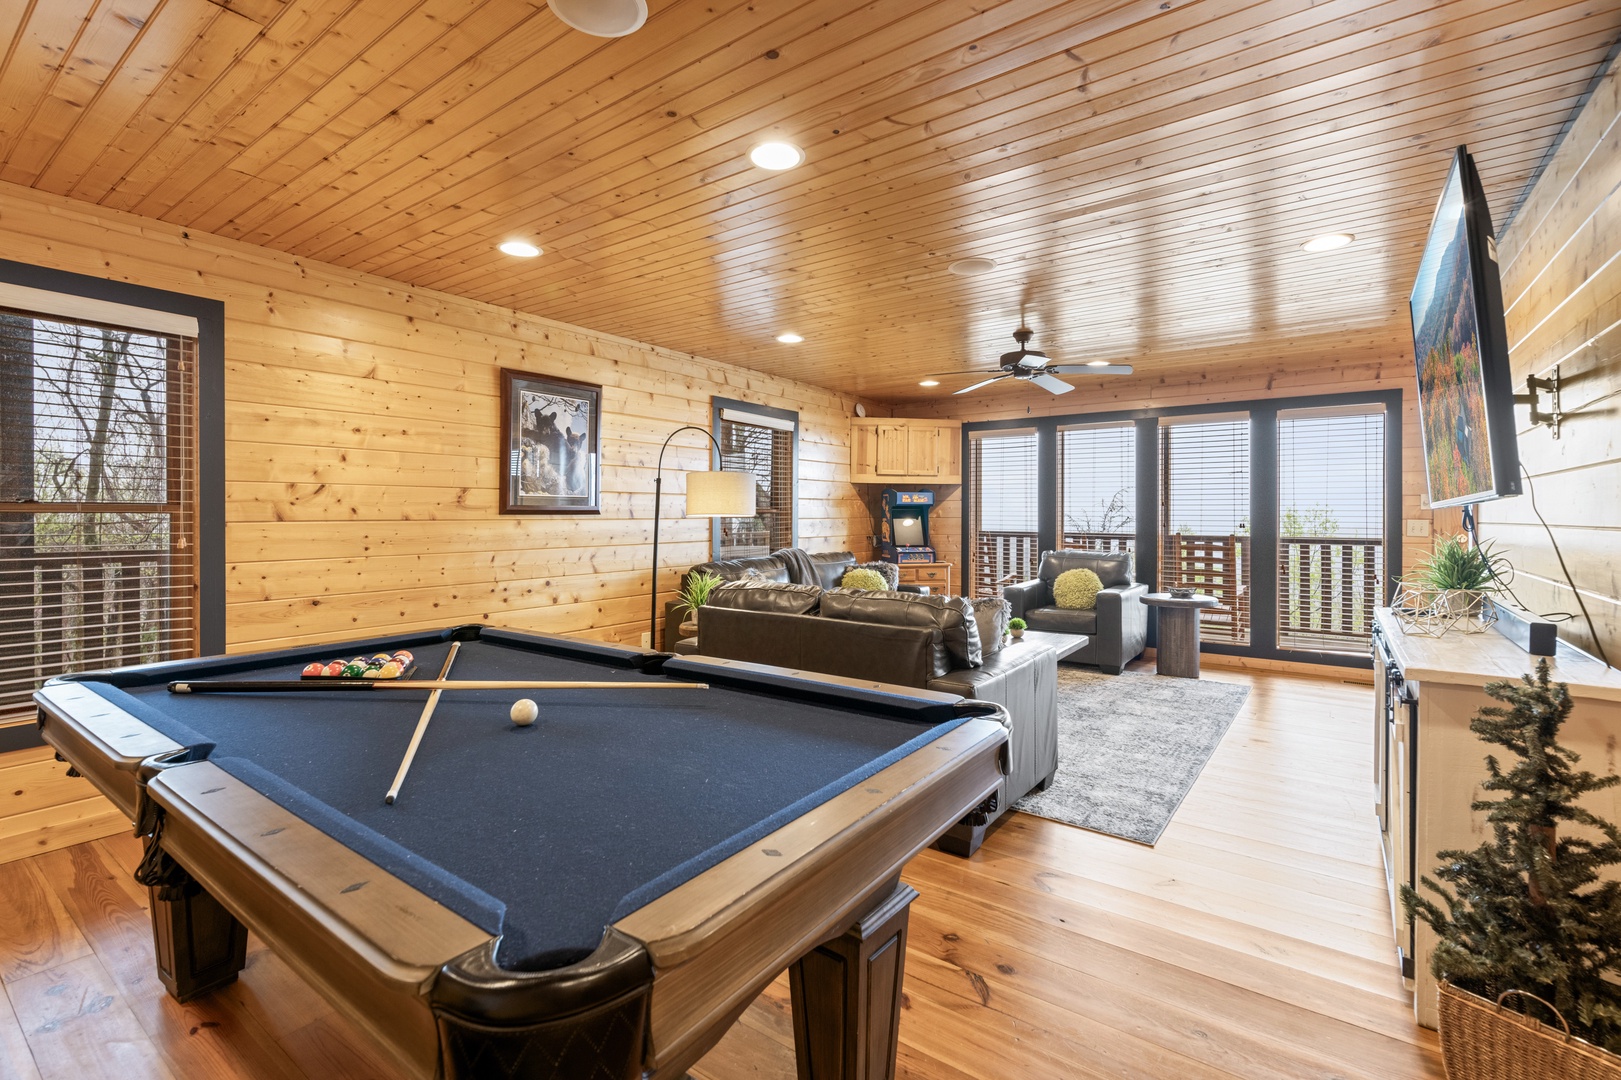 Game room with Pool Table, TV, Arcade